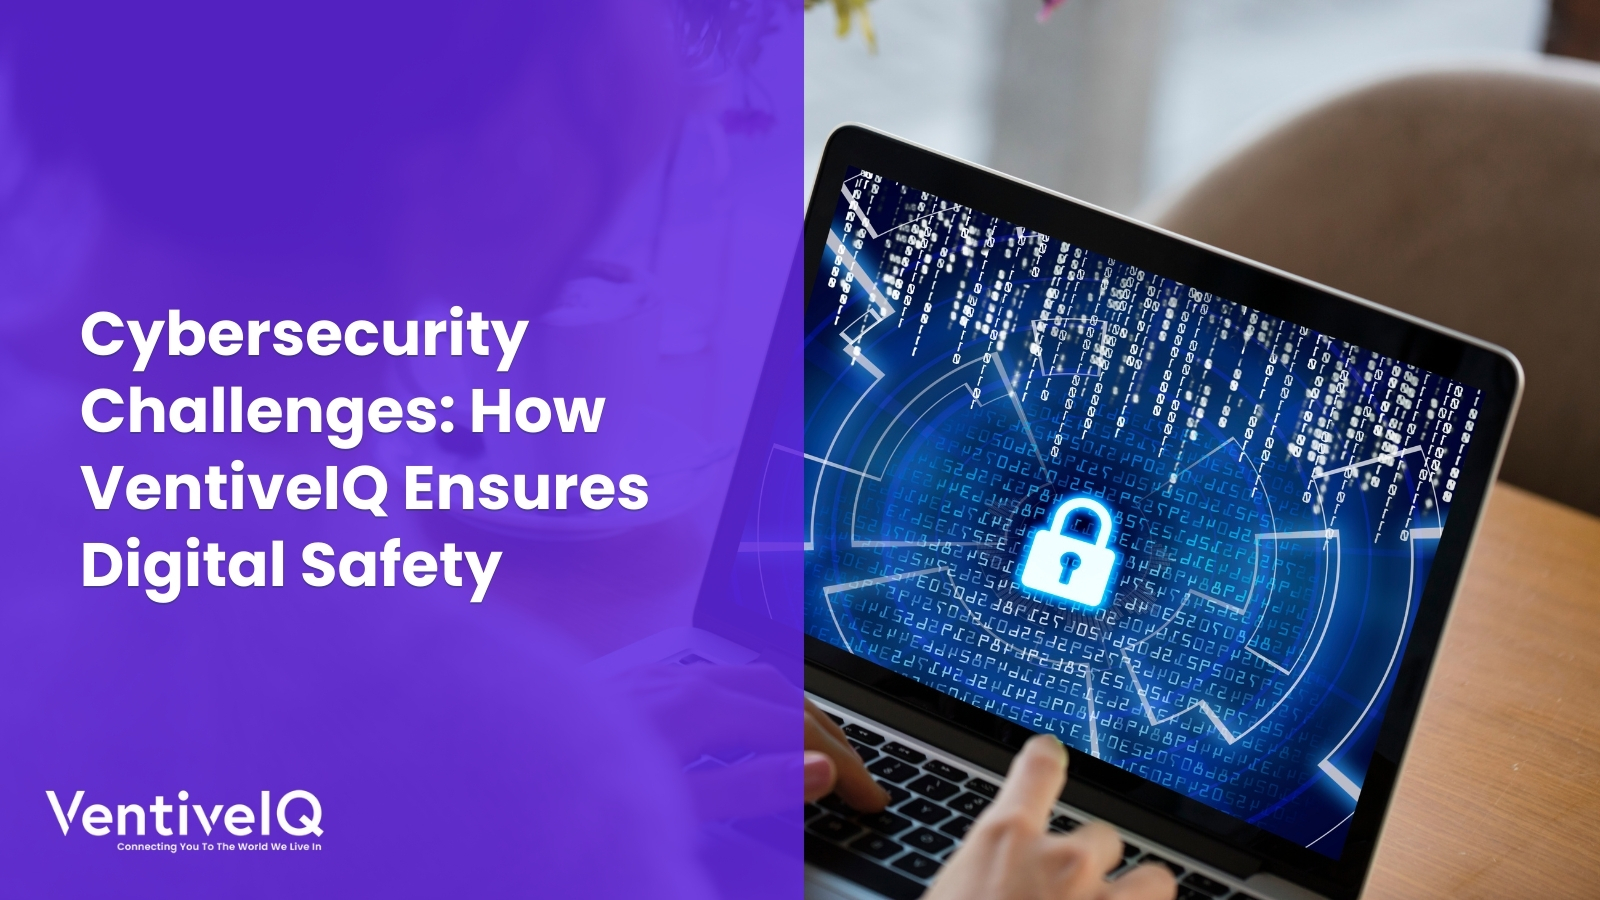 Cybersecurity Challenges: How VentiveIQ Ensures Digital Safety